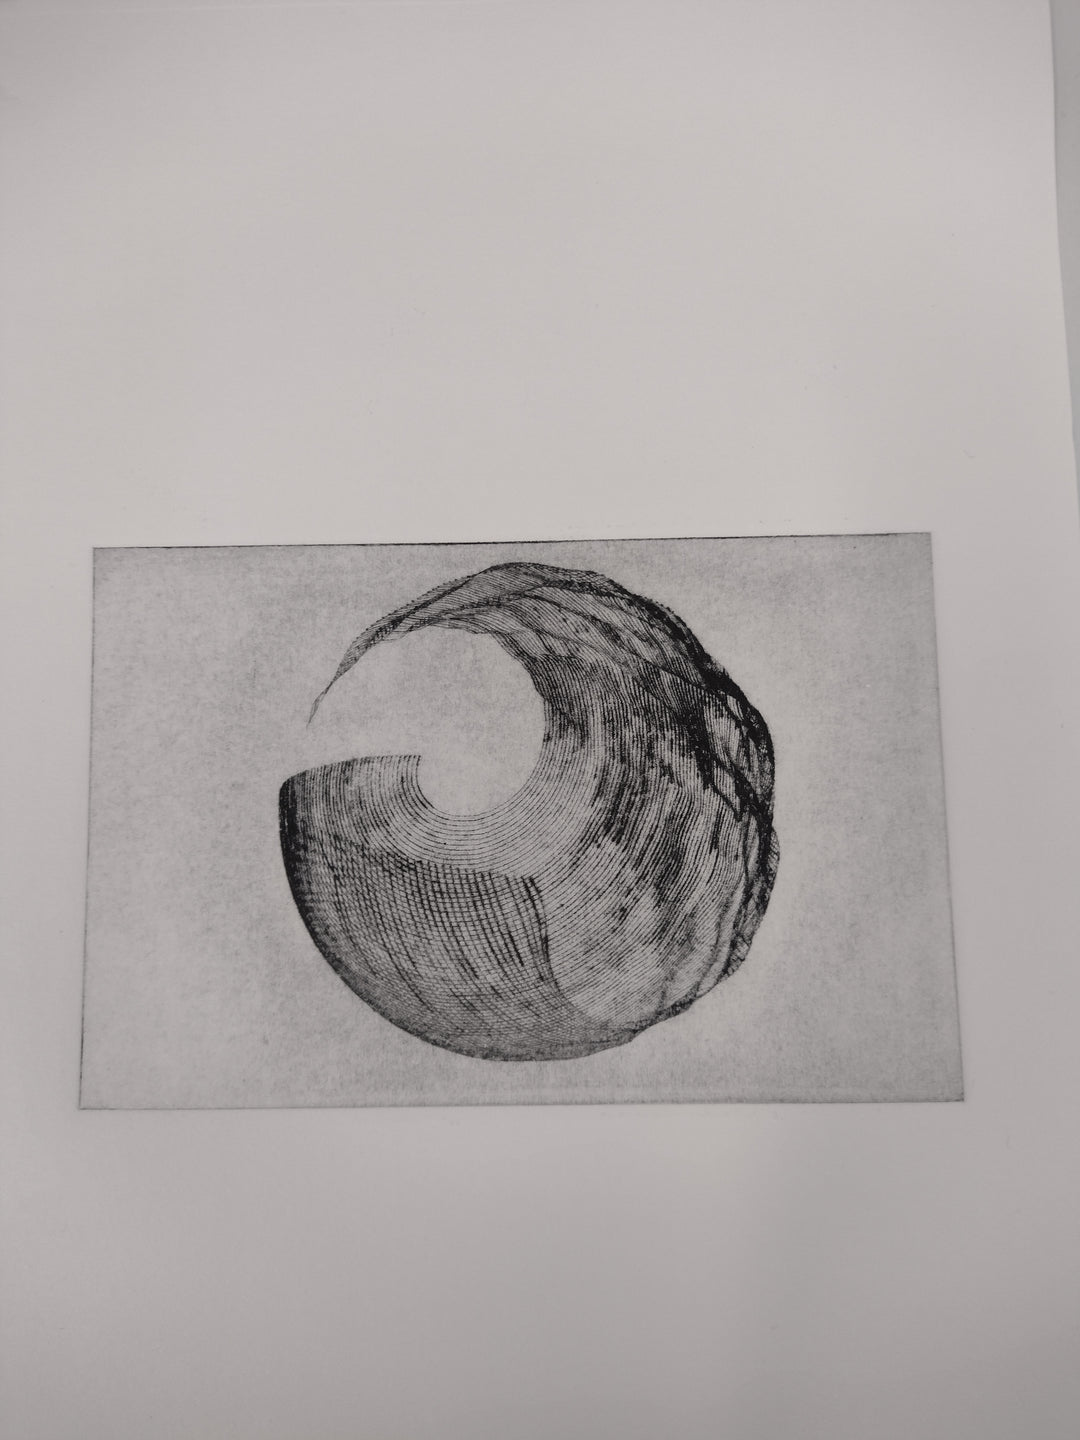 Dry Point Intaglio in the Print Room